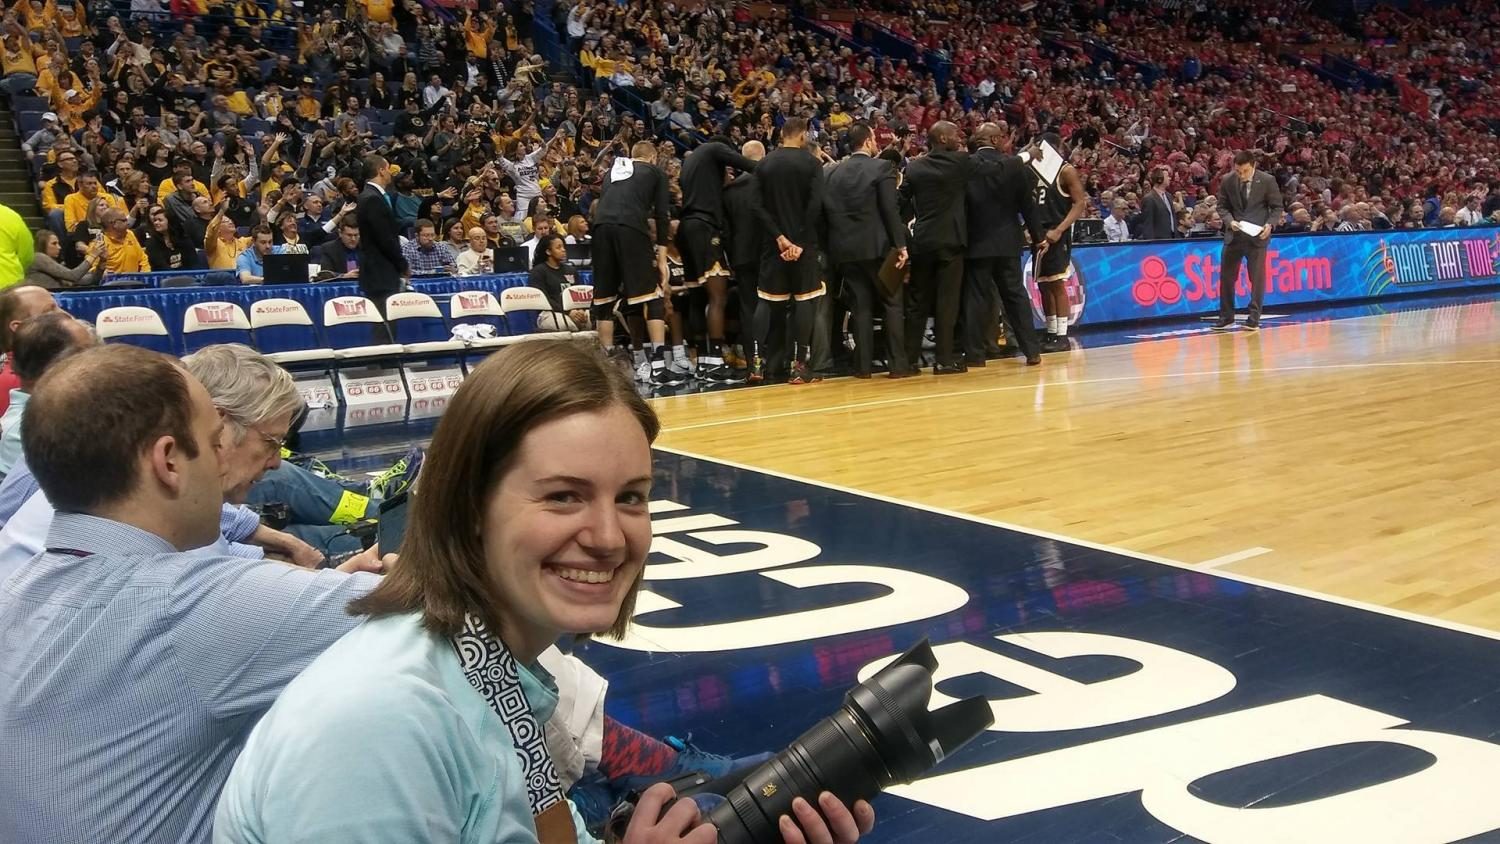 Hannah Roberts sits courtside as she photographs Wichita State in the Missouri Valley Conference Tournament Championship game in St. Louis. (March 5, 2017)